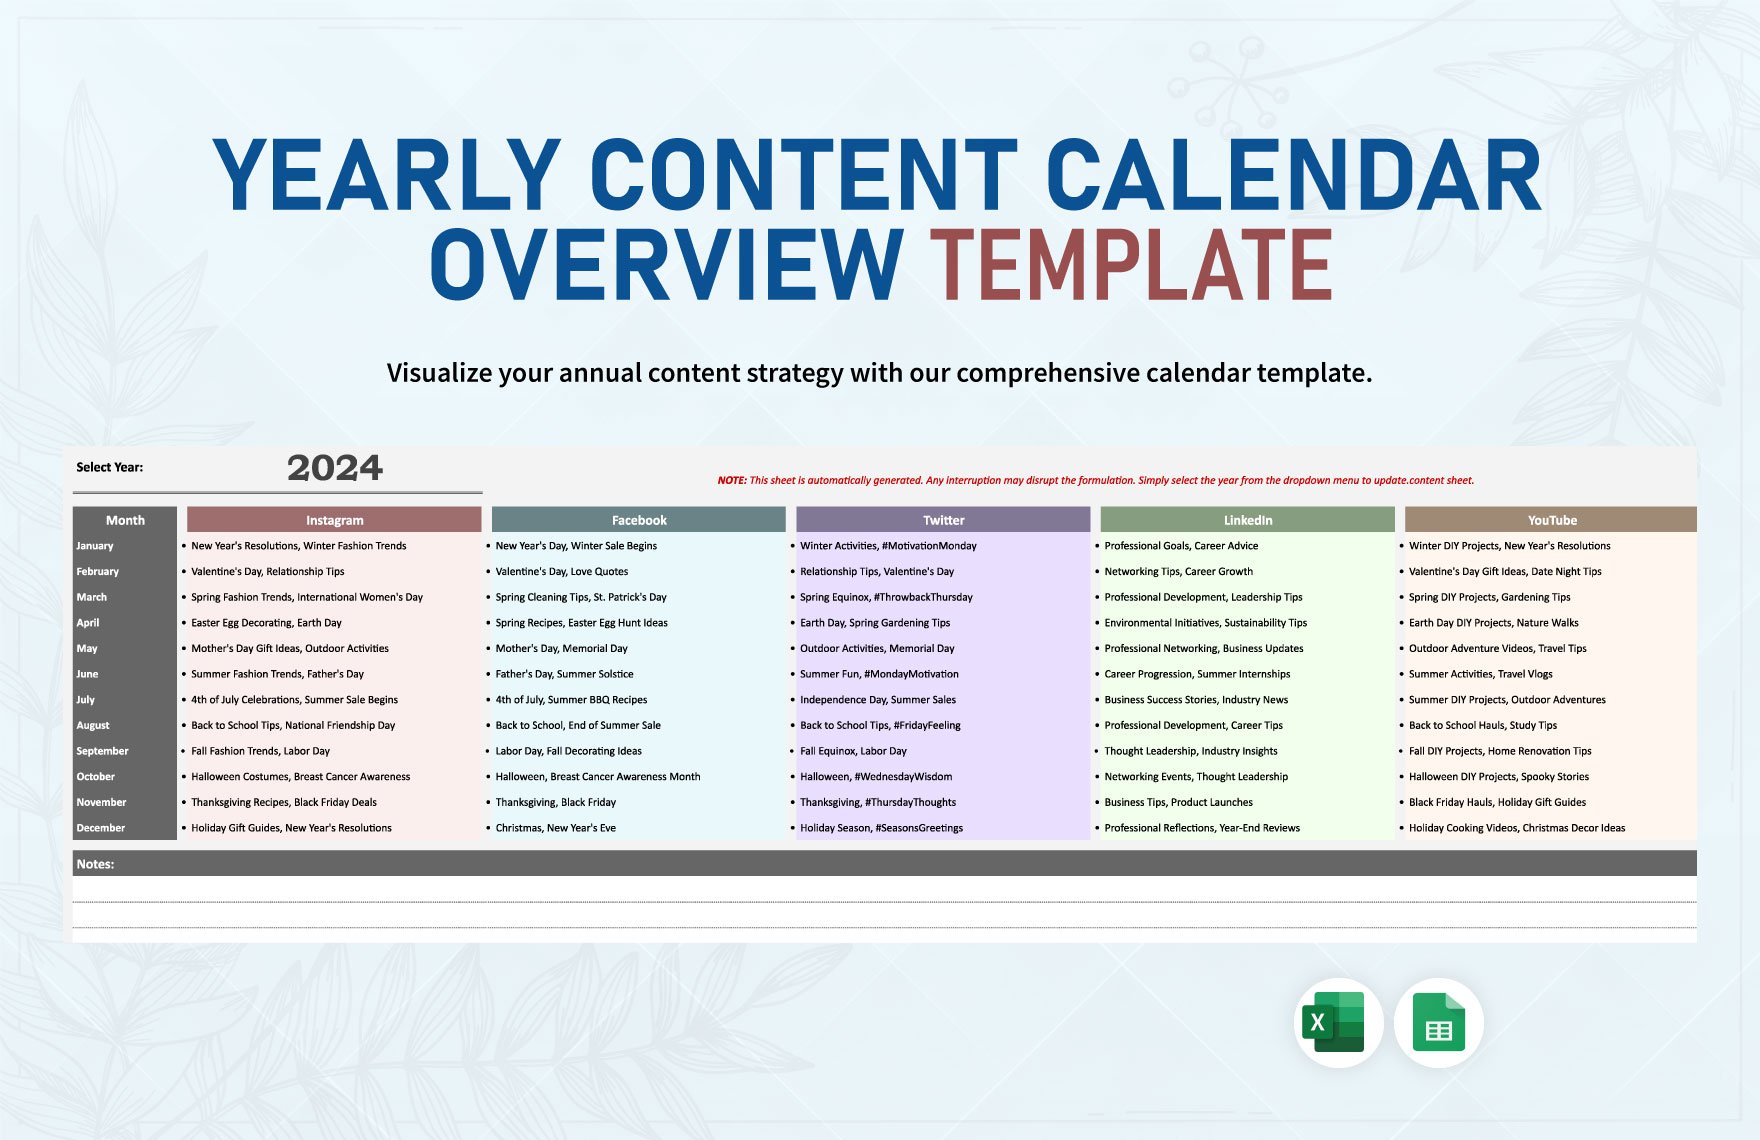 Yearly Content Calendar Overview Template in Excel, Google Sheets